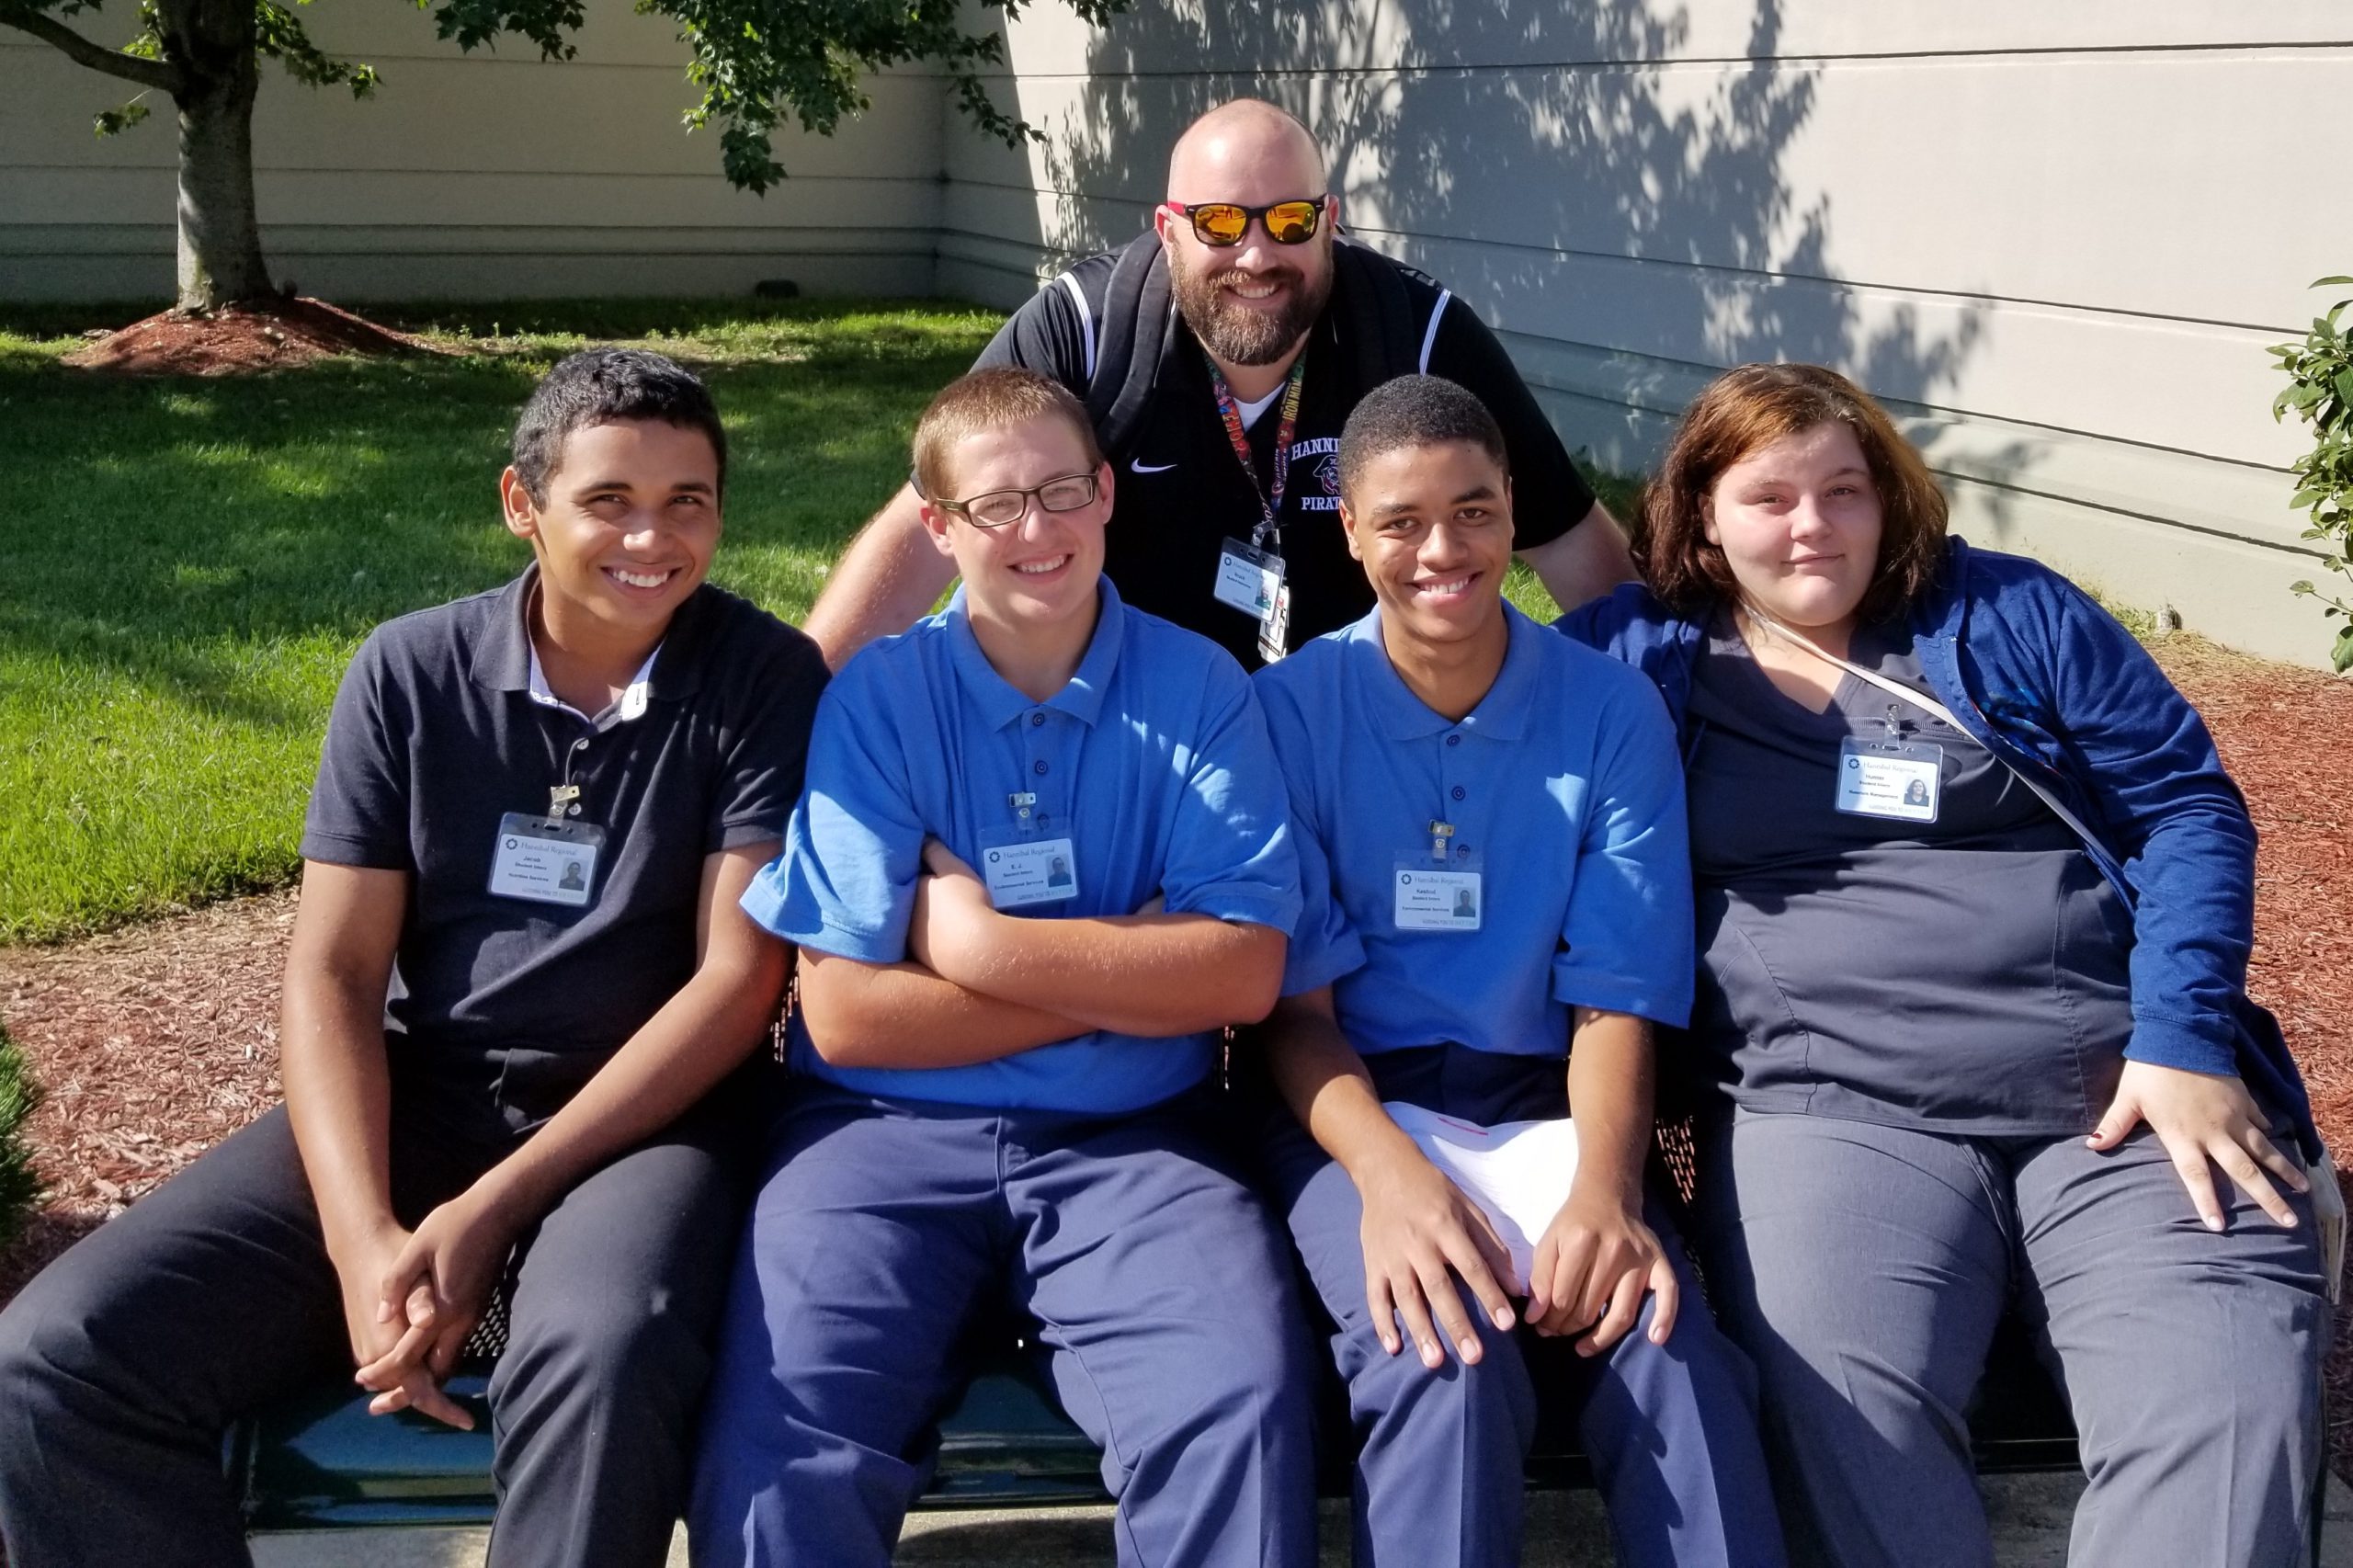 HEALTHY FUTURES IN SPECIAL EDUCATION—Hannibal Public School District's Basic Employment Skills Training program helps students with special needs learn life skills through work experience at a local hospital.